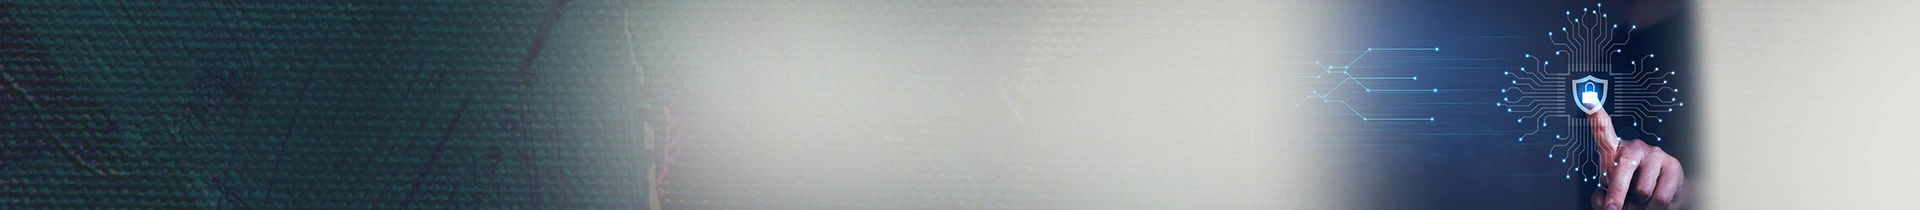 Cyber Security banner